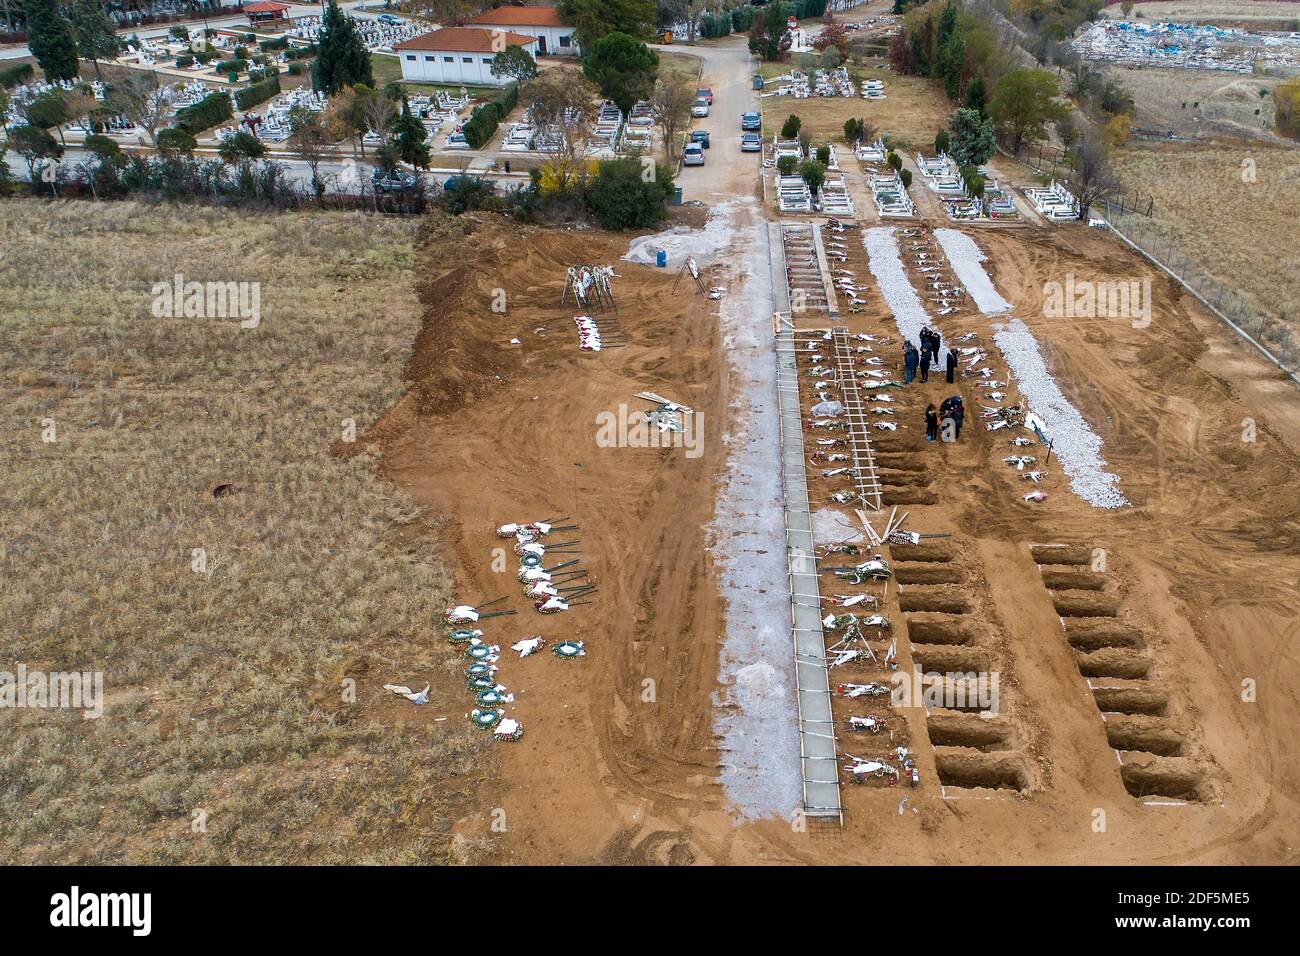 Thessaloniki, Greece - December 3, 2020: Aerial view of new graves of Covid-19 victims in a cemetery in Evosmos, Thessaloniki Stock Photo